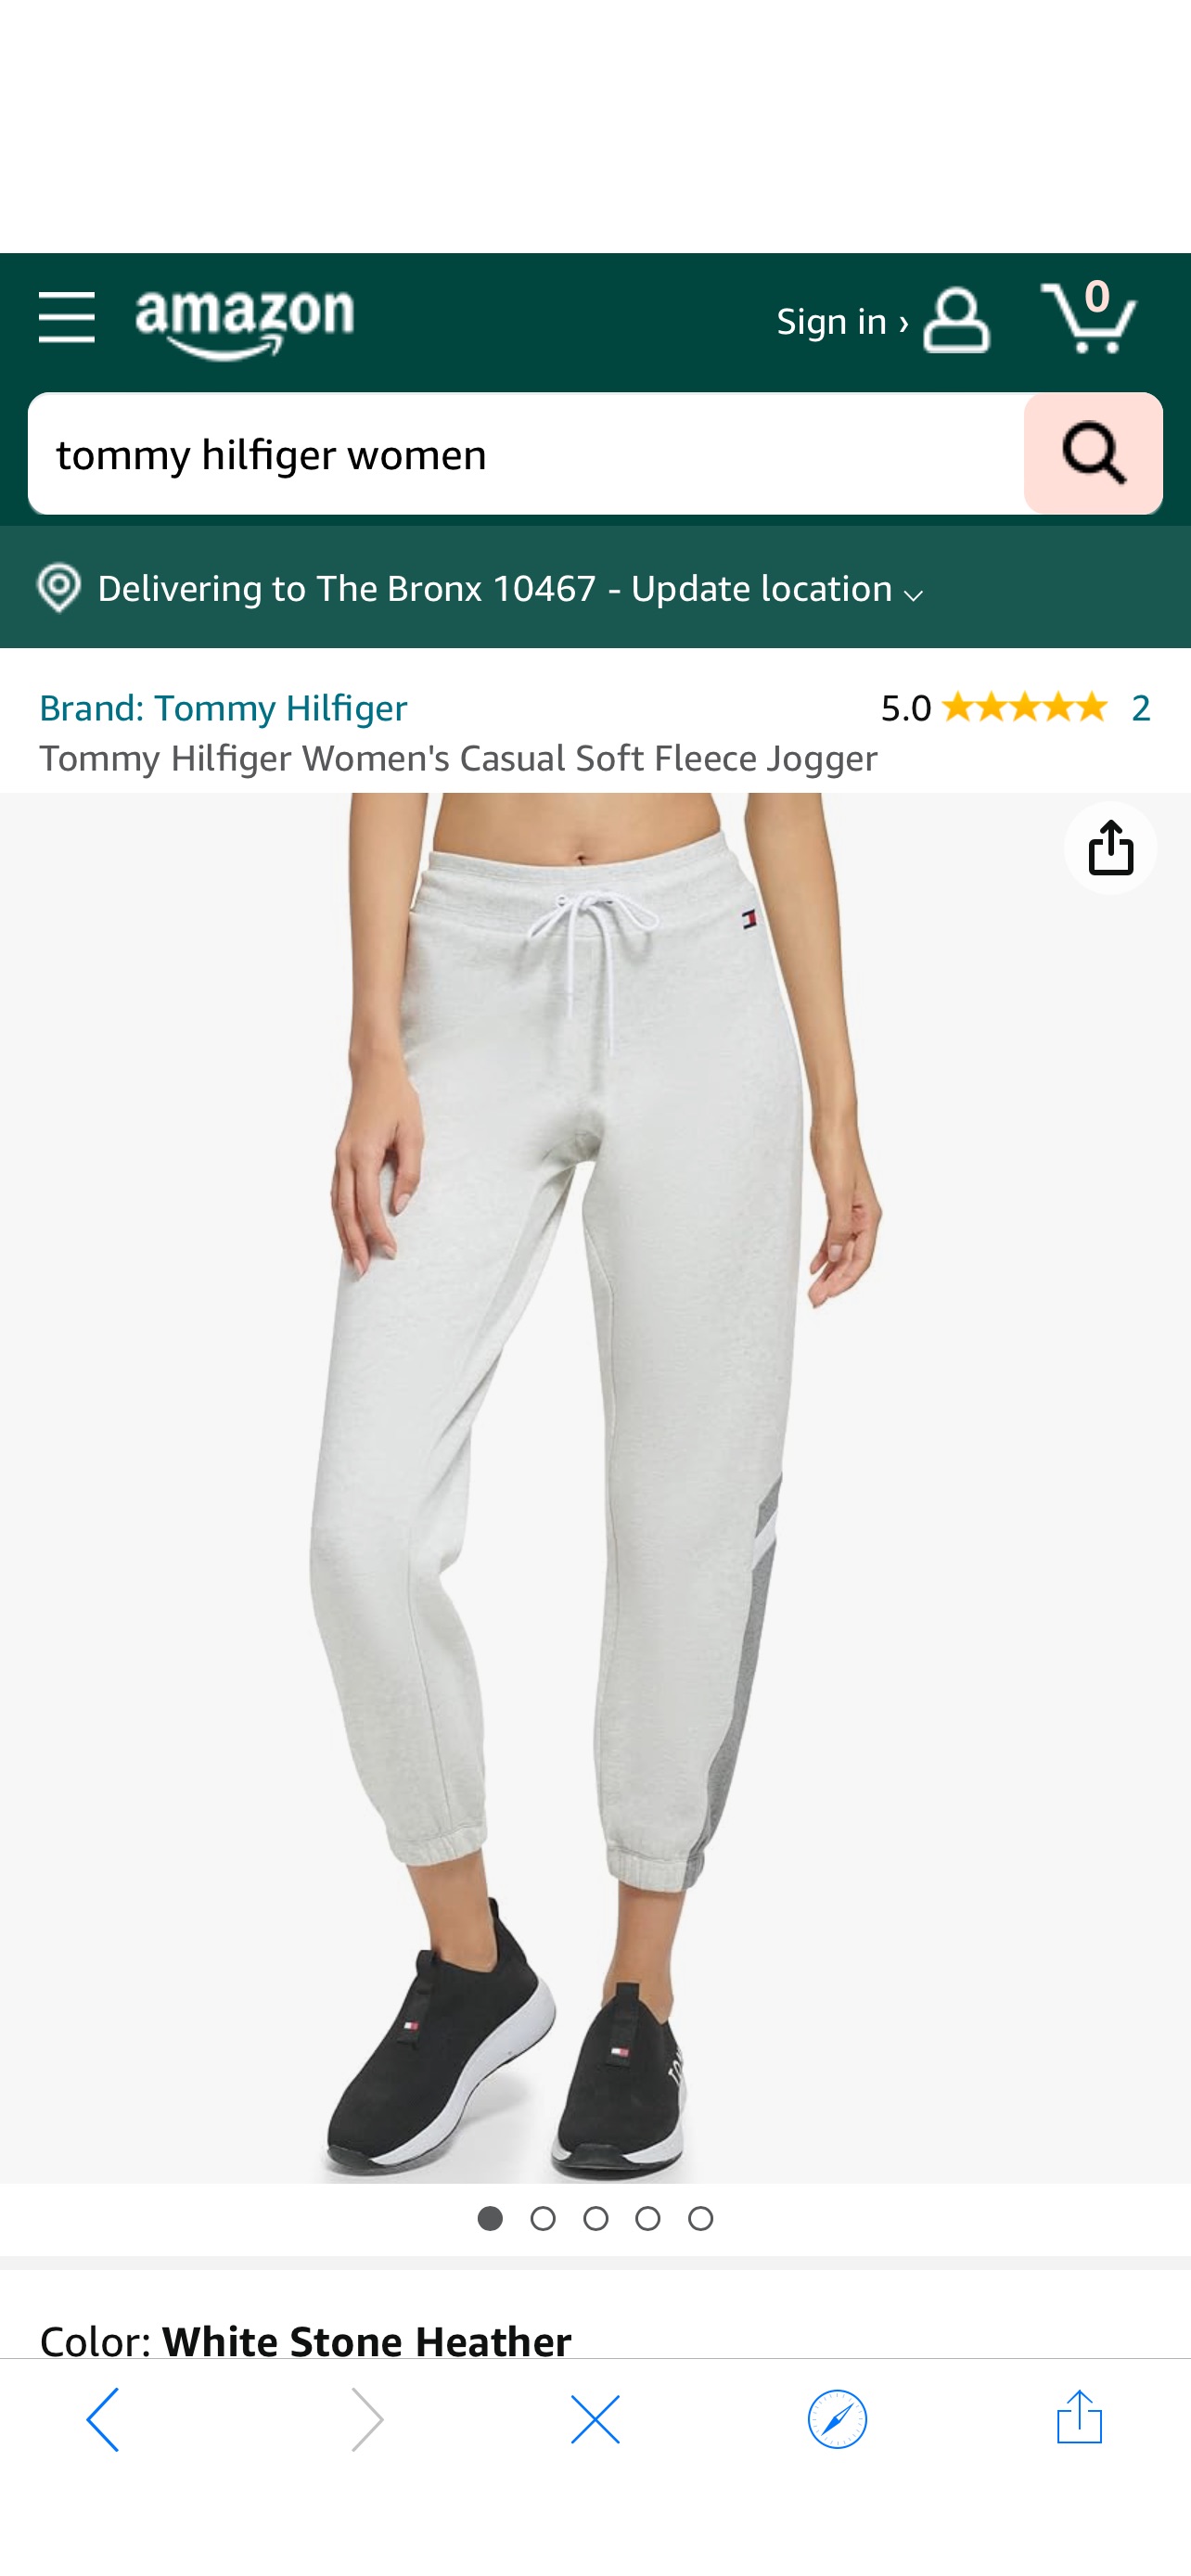 Tommy Hilfiger Women's Casual Soft Fleece Jogger, White Stone Heather at Amazon Women’s Clothing store